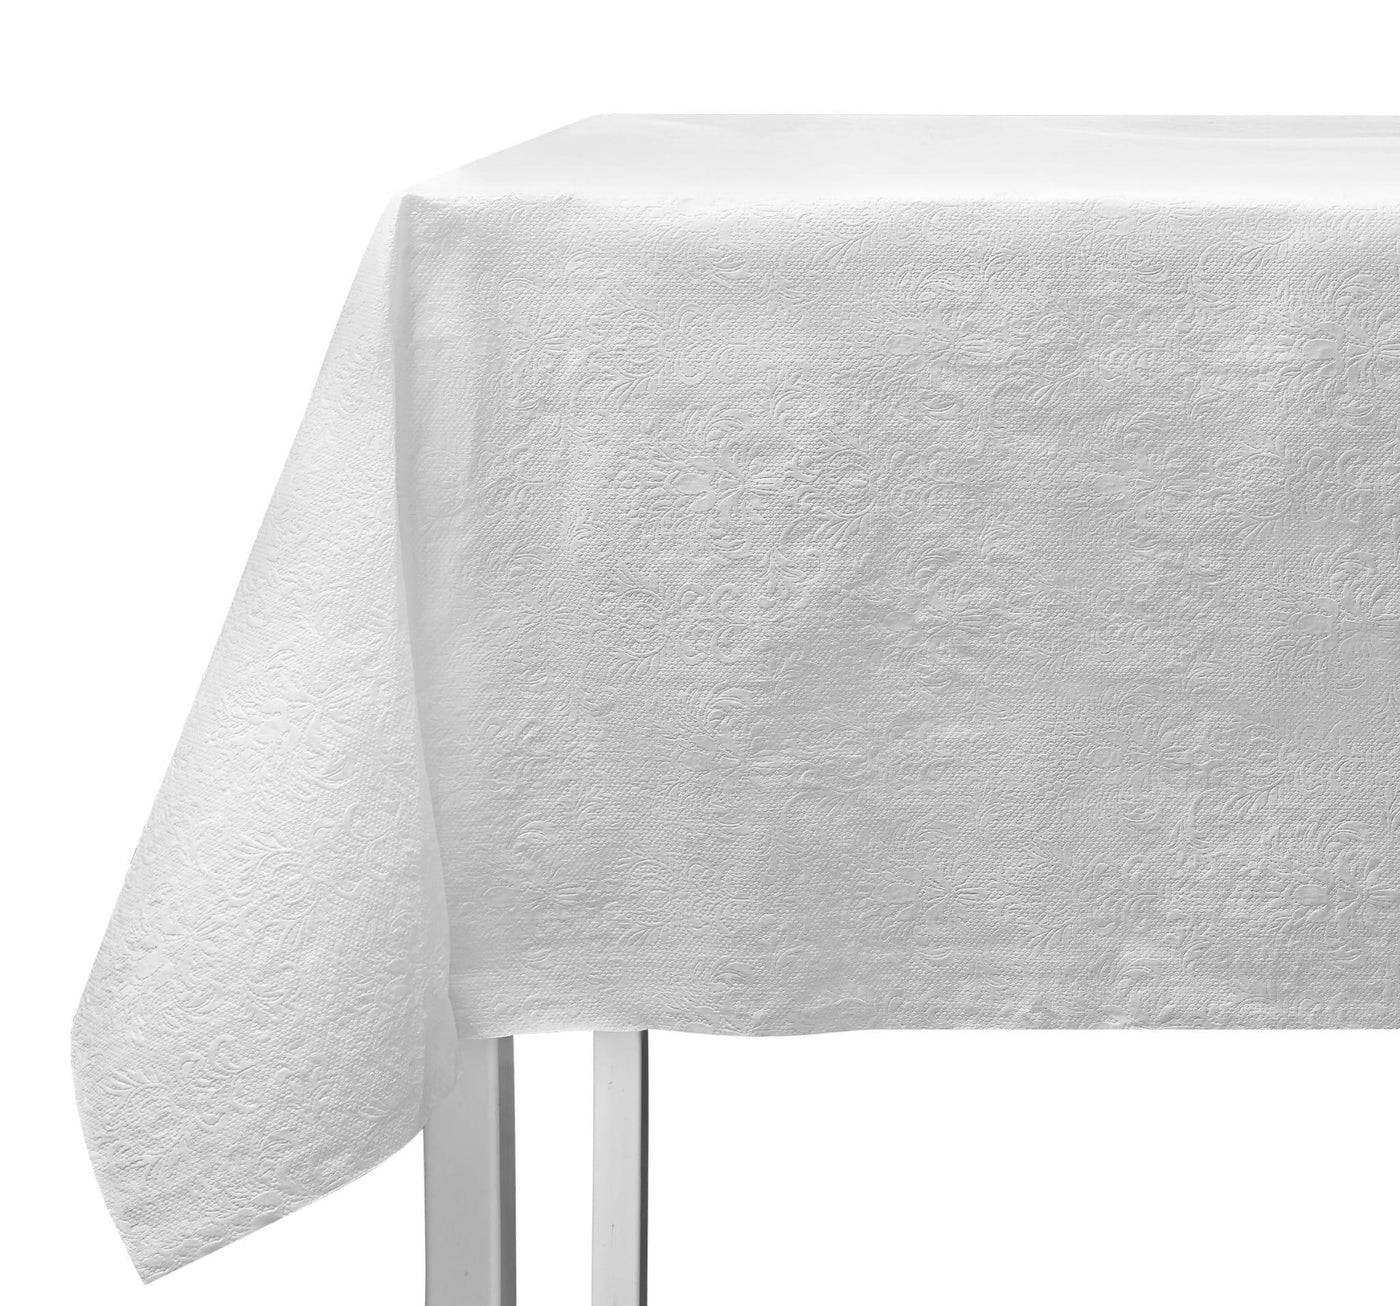 54"x108" White Plastic Embossed Tablecloth (1 Count)